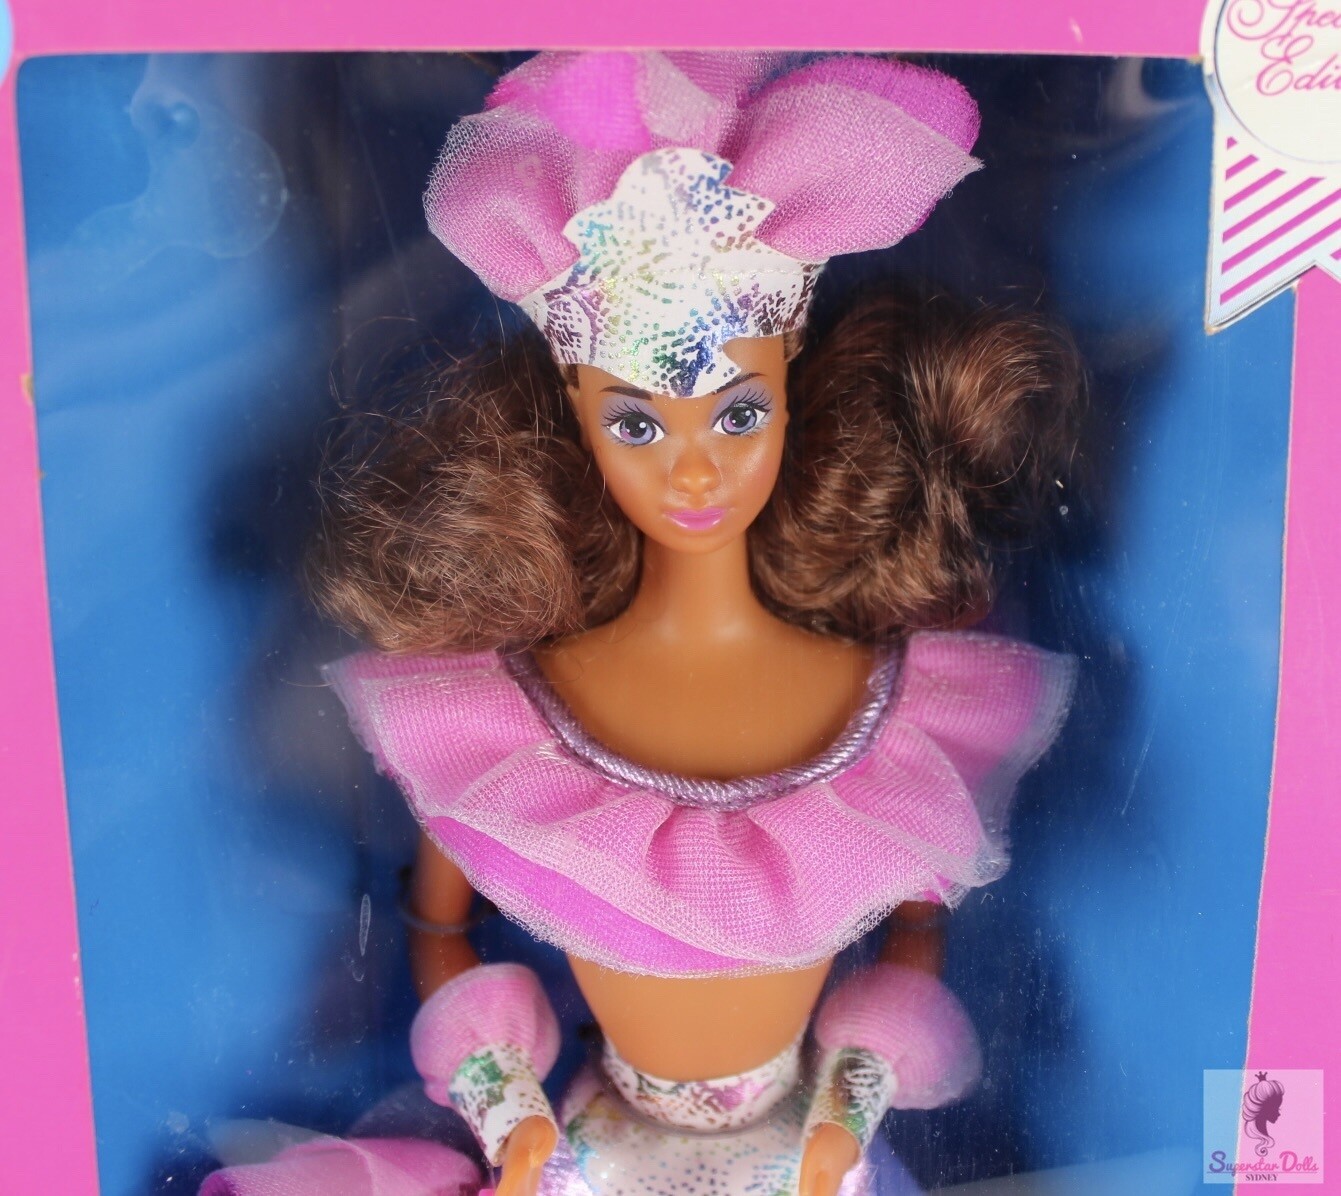 1989 Foreign Japanese Edition: Brazilian Barbie Doll from the Dolls of the World Collection